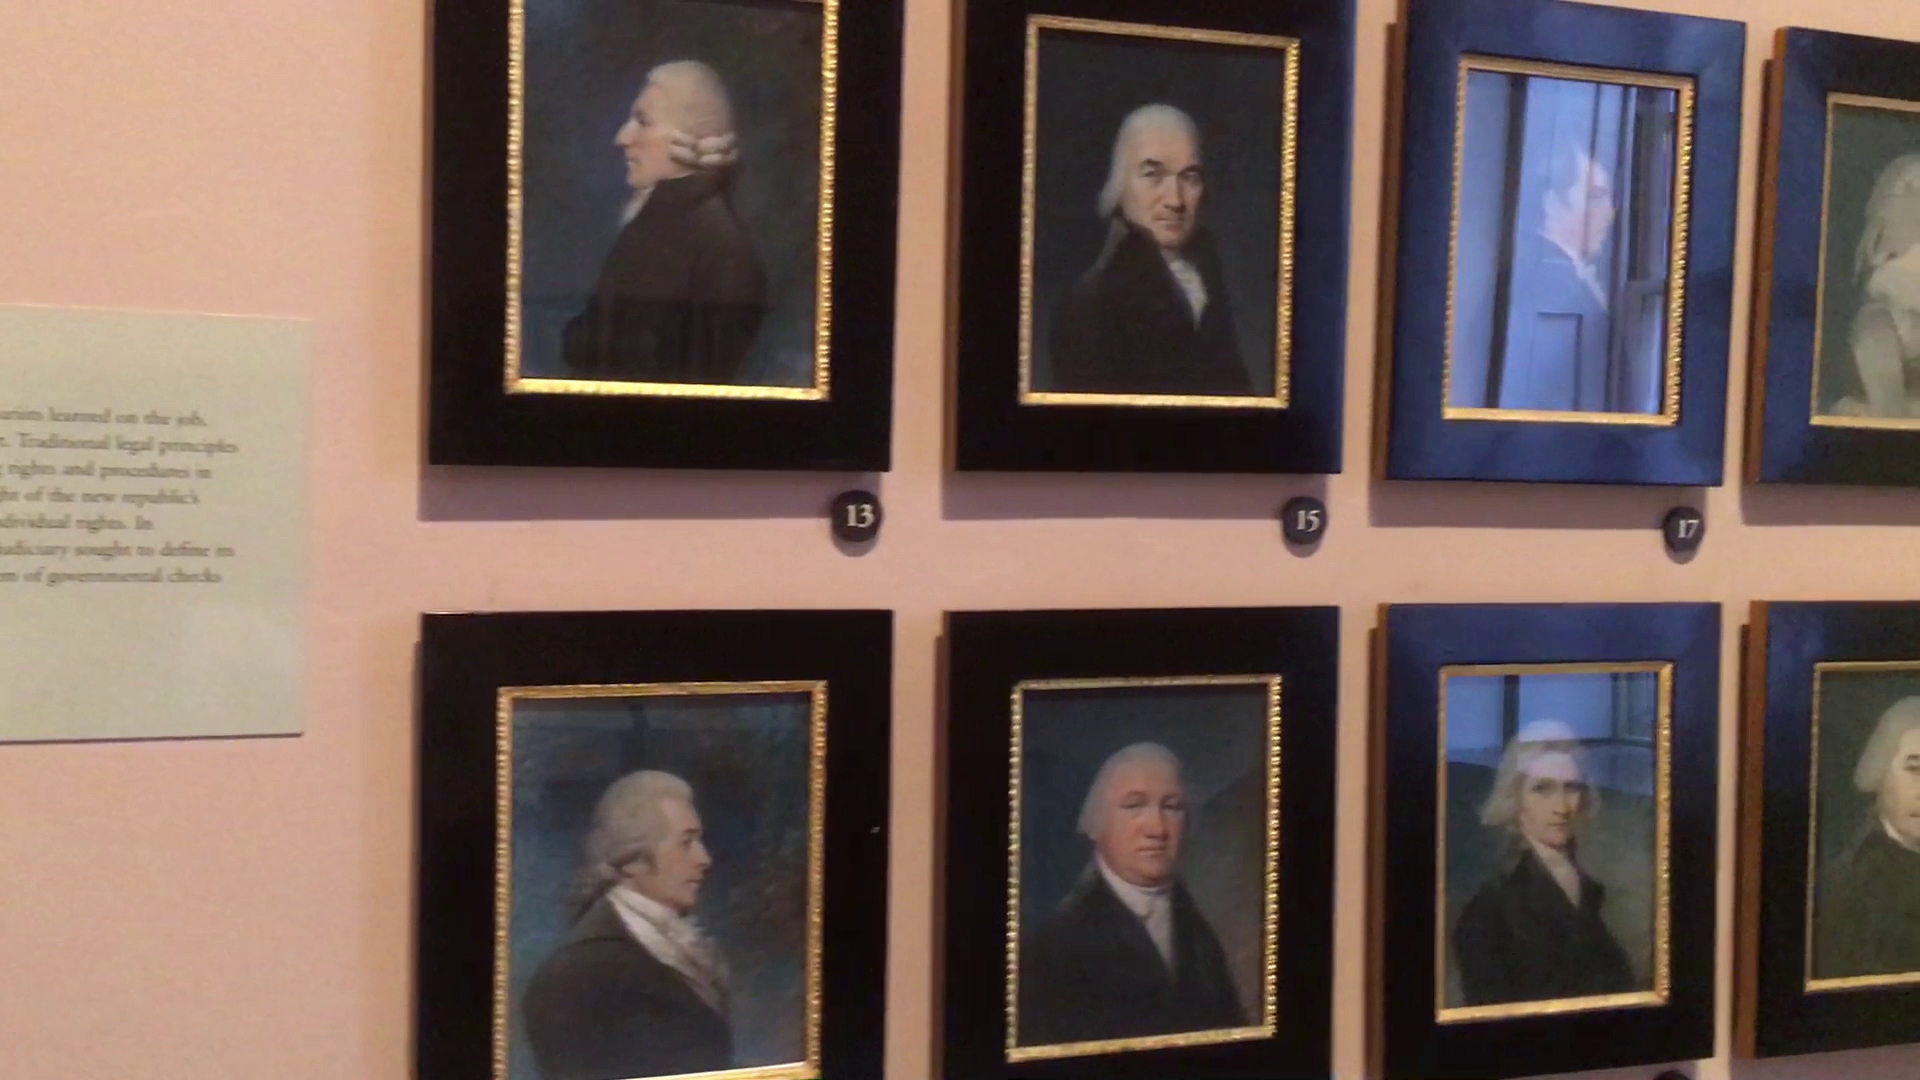 Second Bank of the United States Portrait Gallery